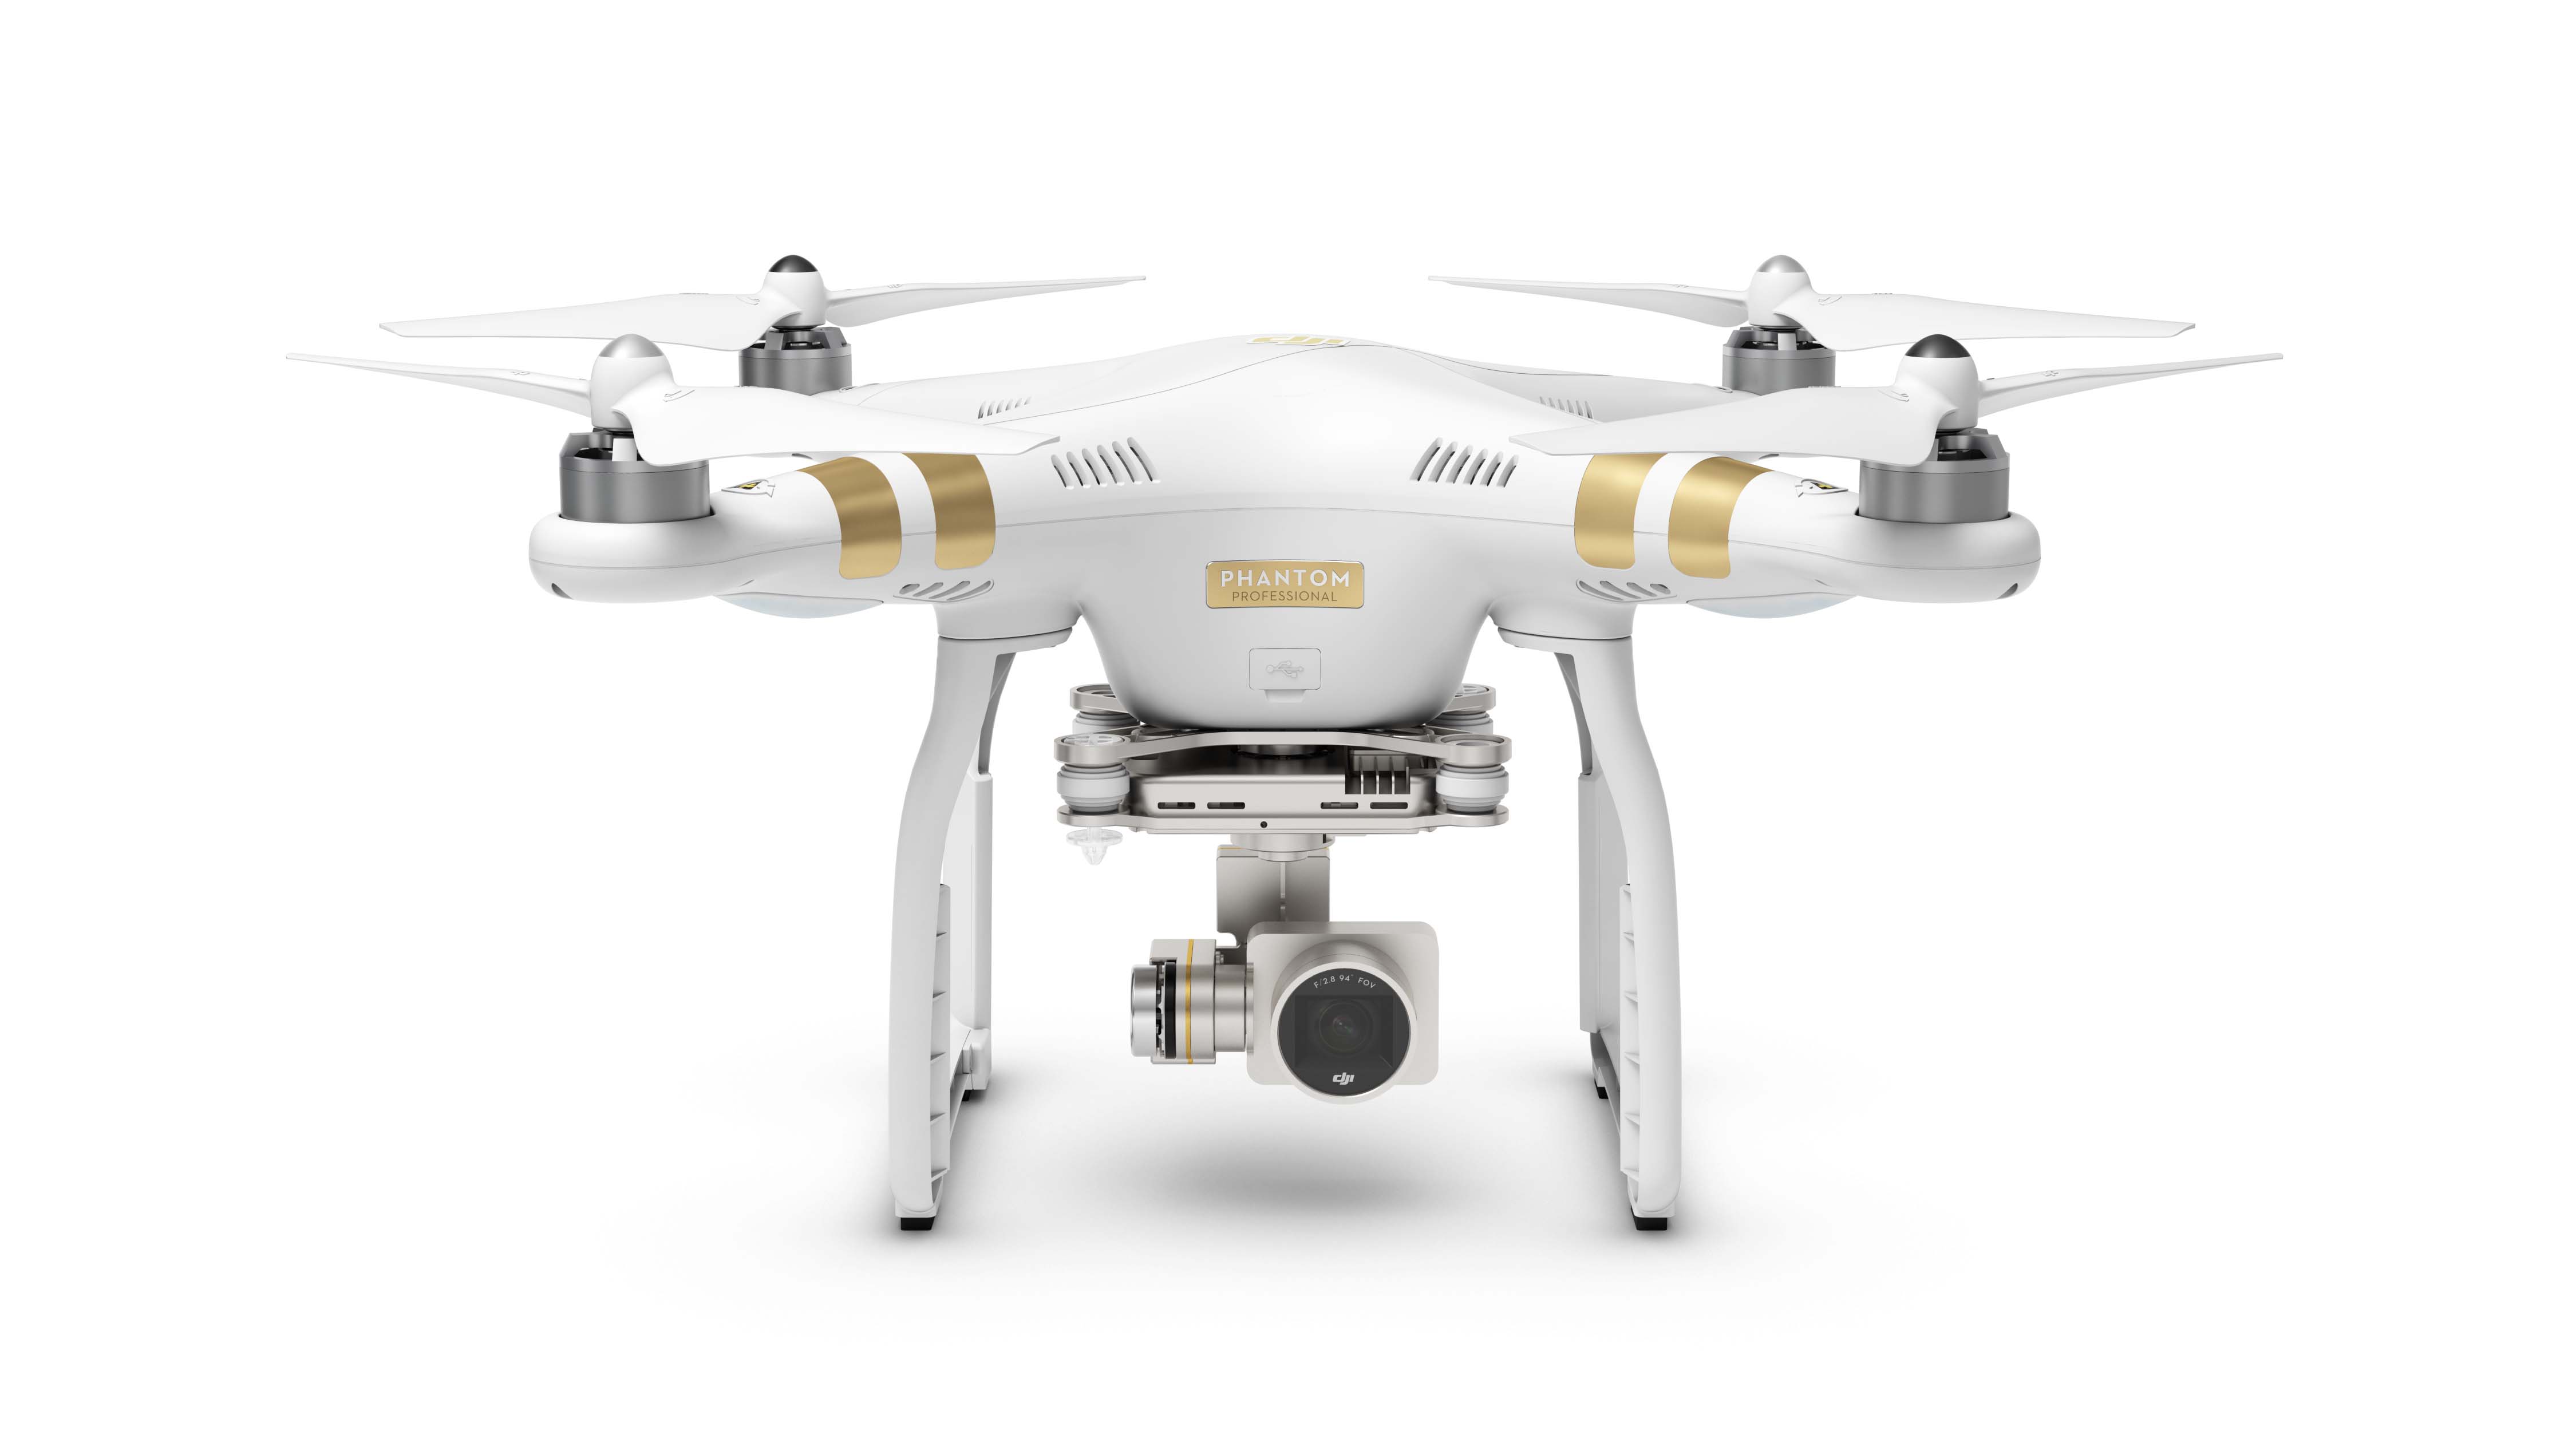 New 4K Capable DJI Phantom 3 Drone Delivers Most of Inspire 1's Virtues